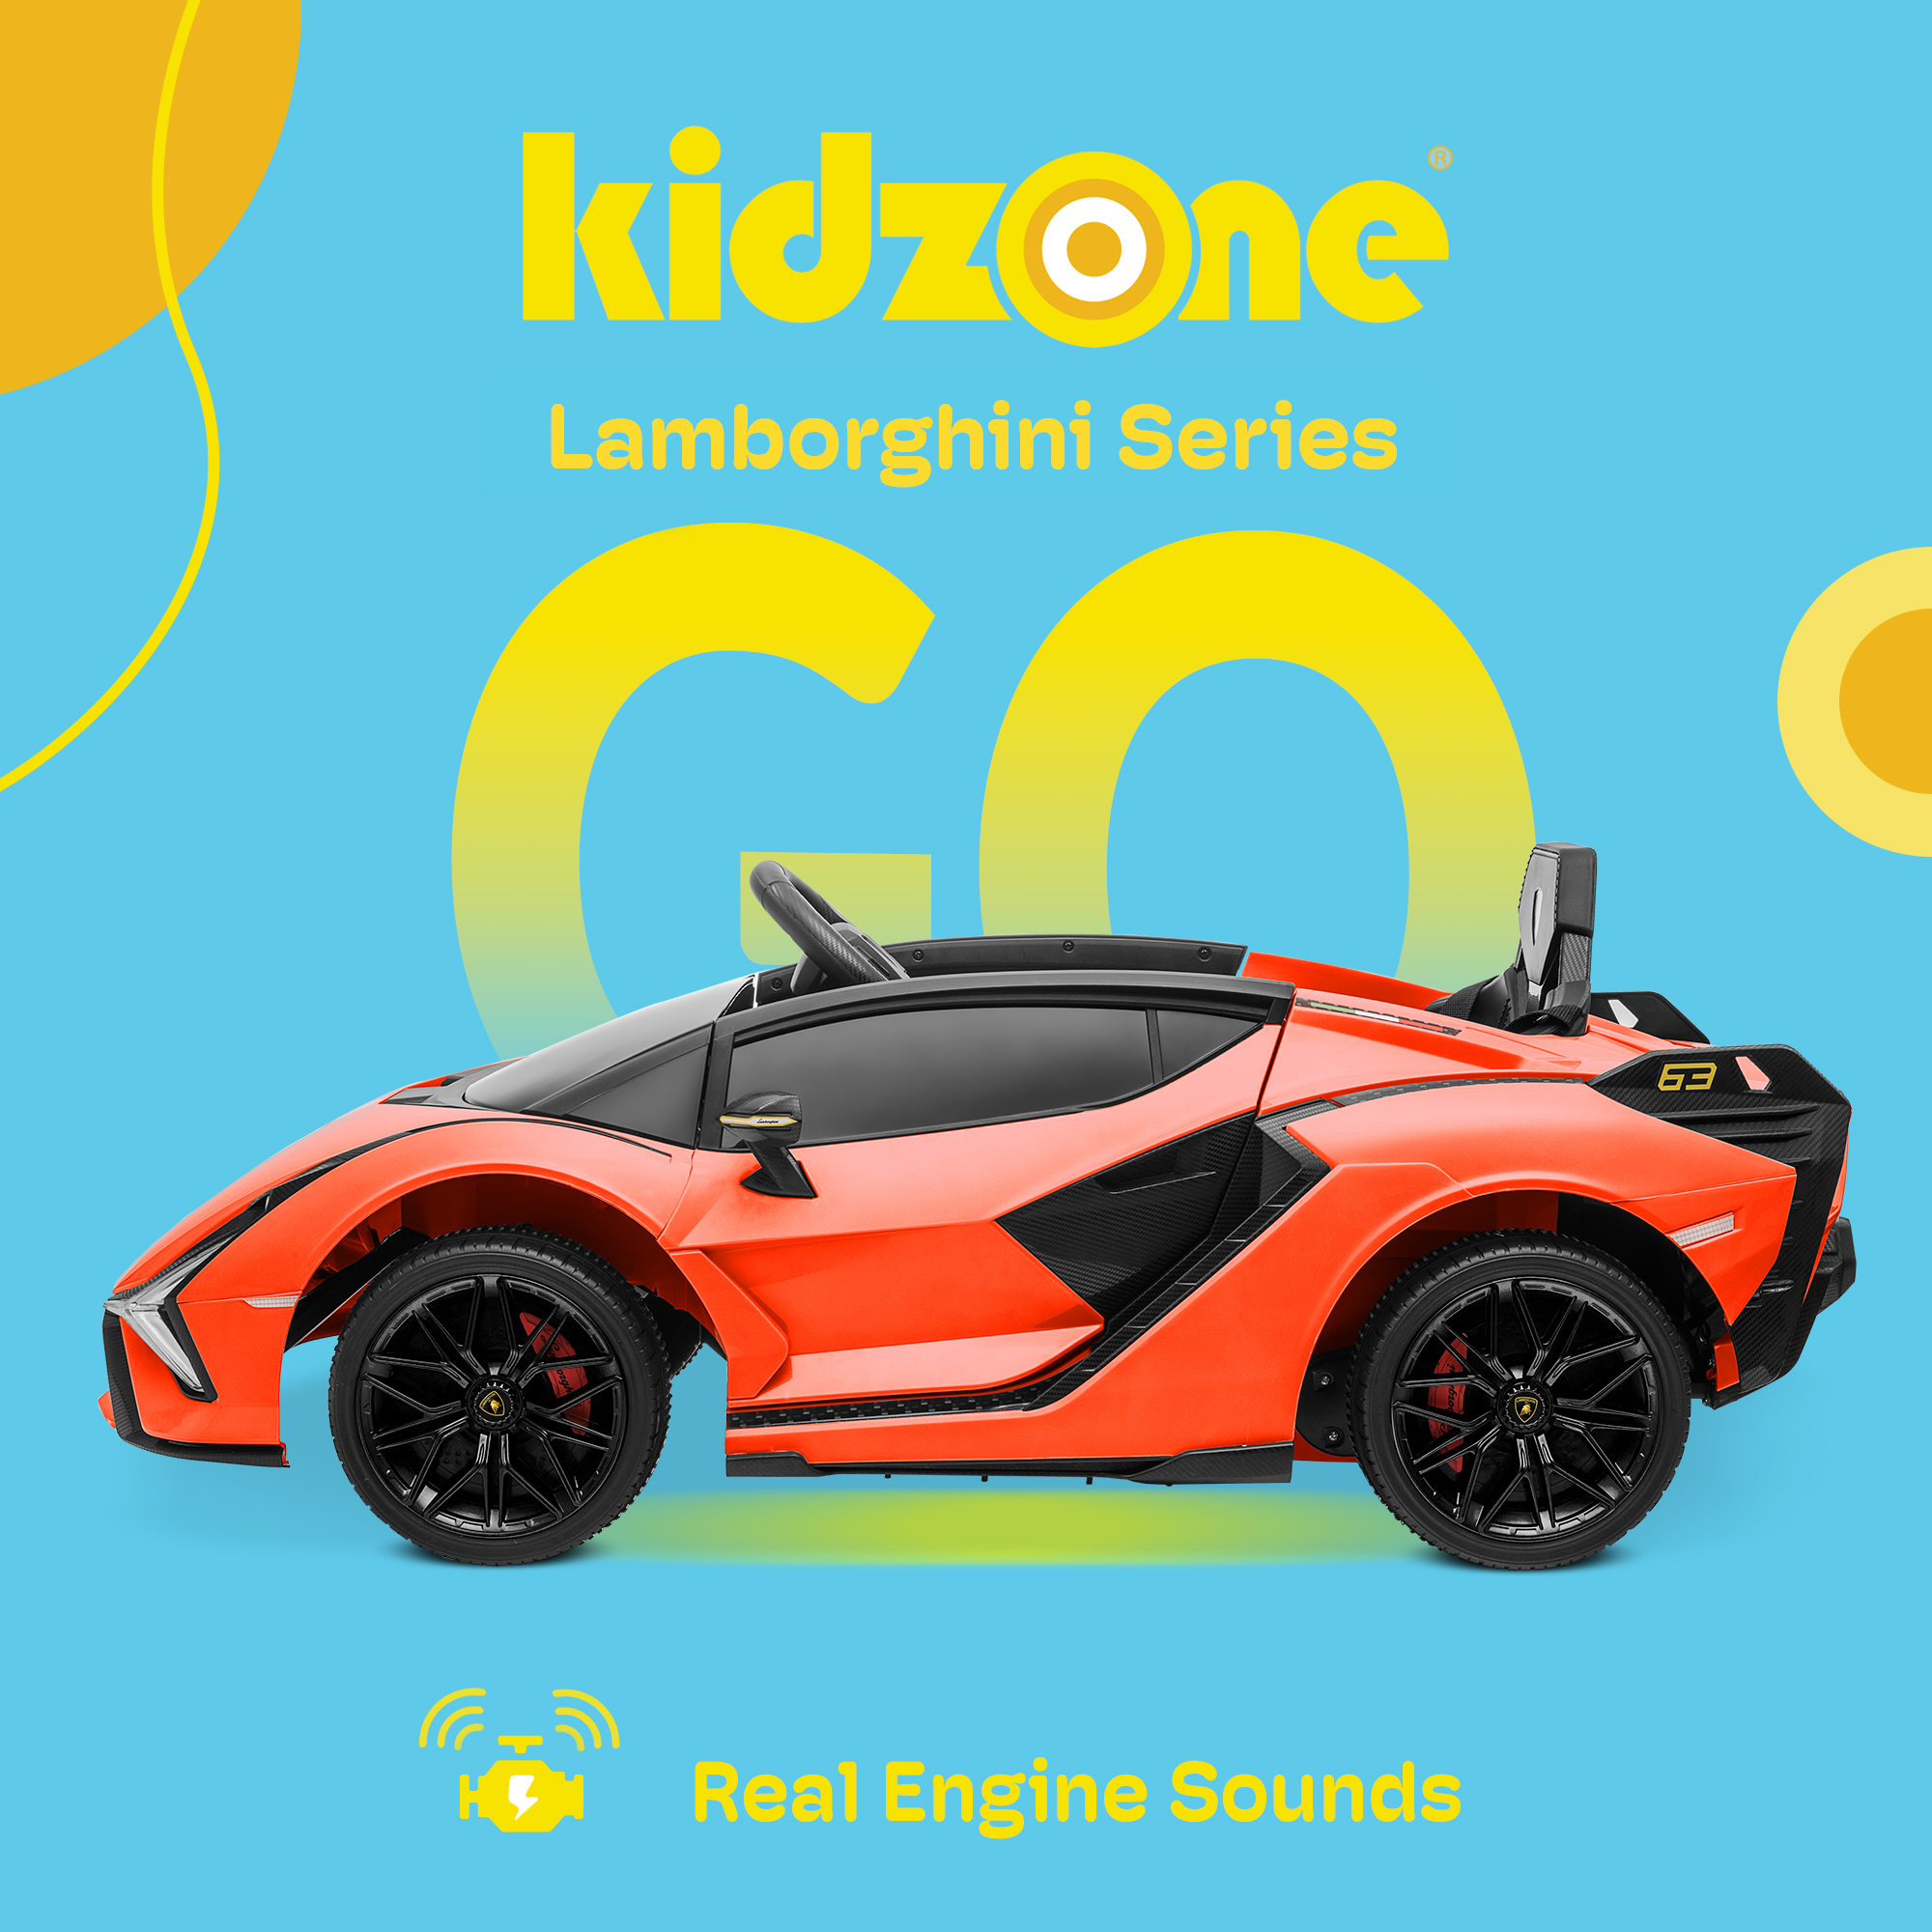 Kidzone Kids 12V Electric Ride On Licensed Lamborghini Sian Roadster Motorized Sport Vehicle With 2 Speed, Remote Control, Wheels Suspension, LED lights, USB/Bluetooth Music, Engine Sounds, Orange - image 2 of 6